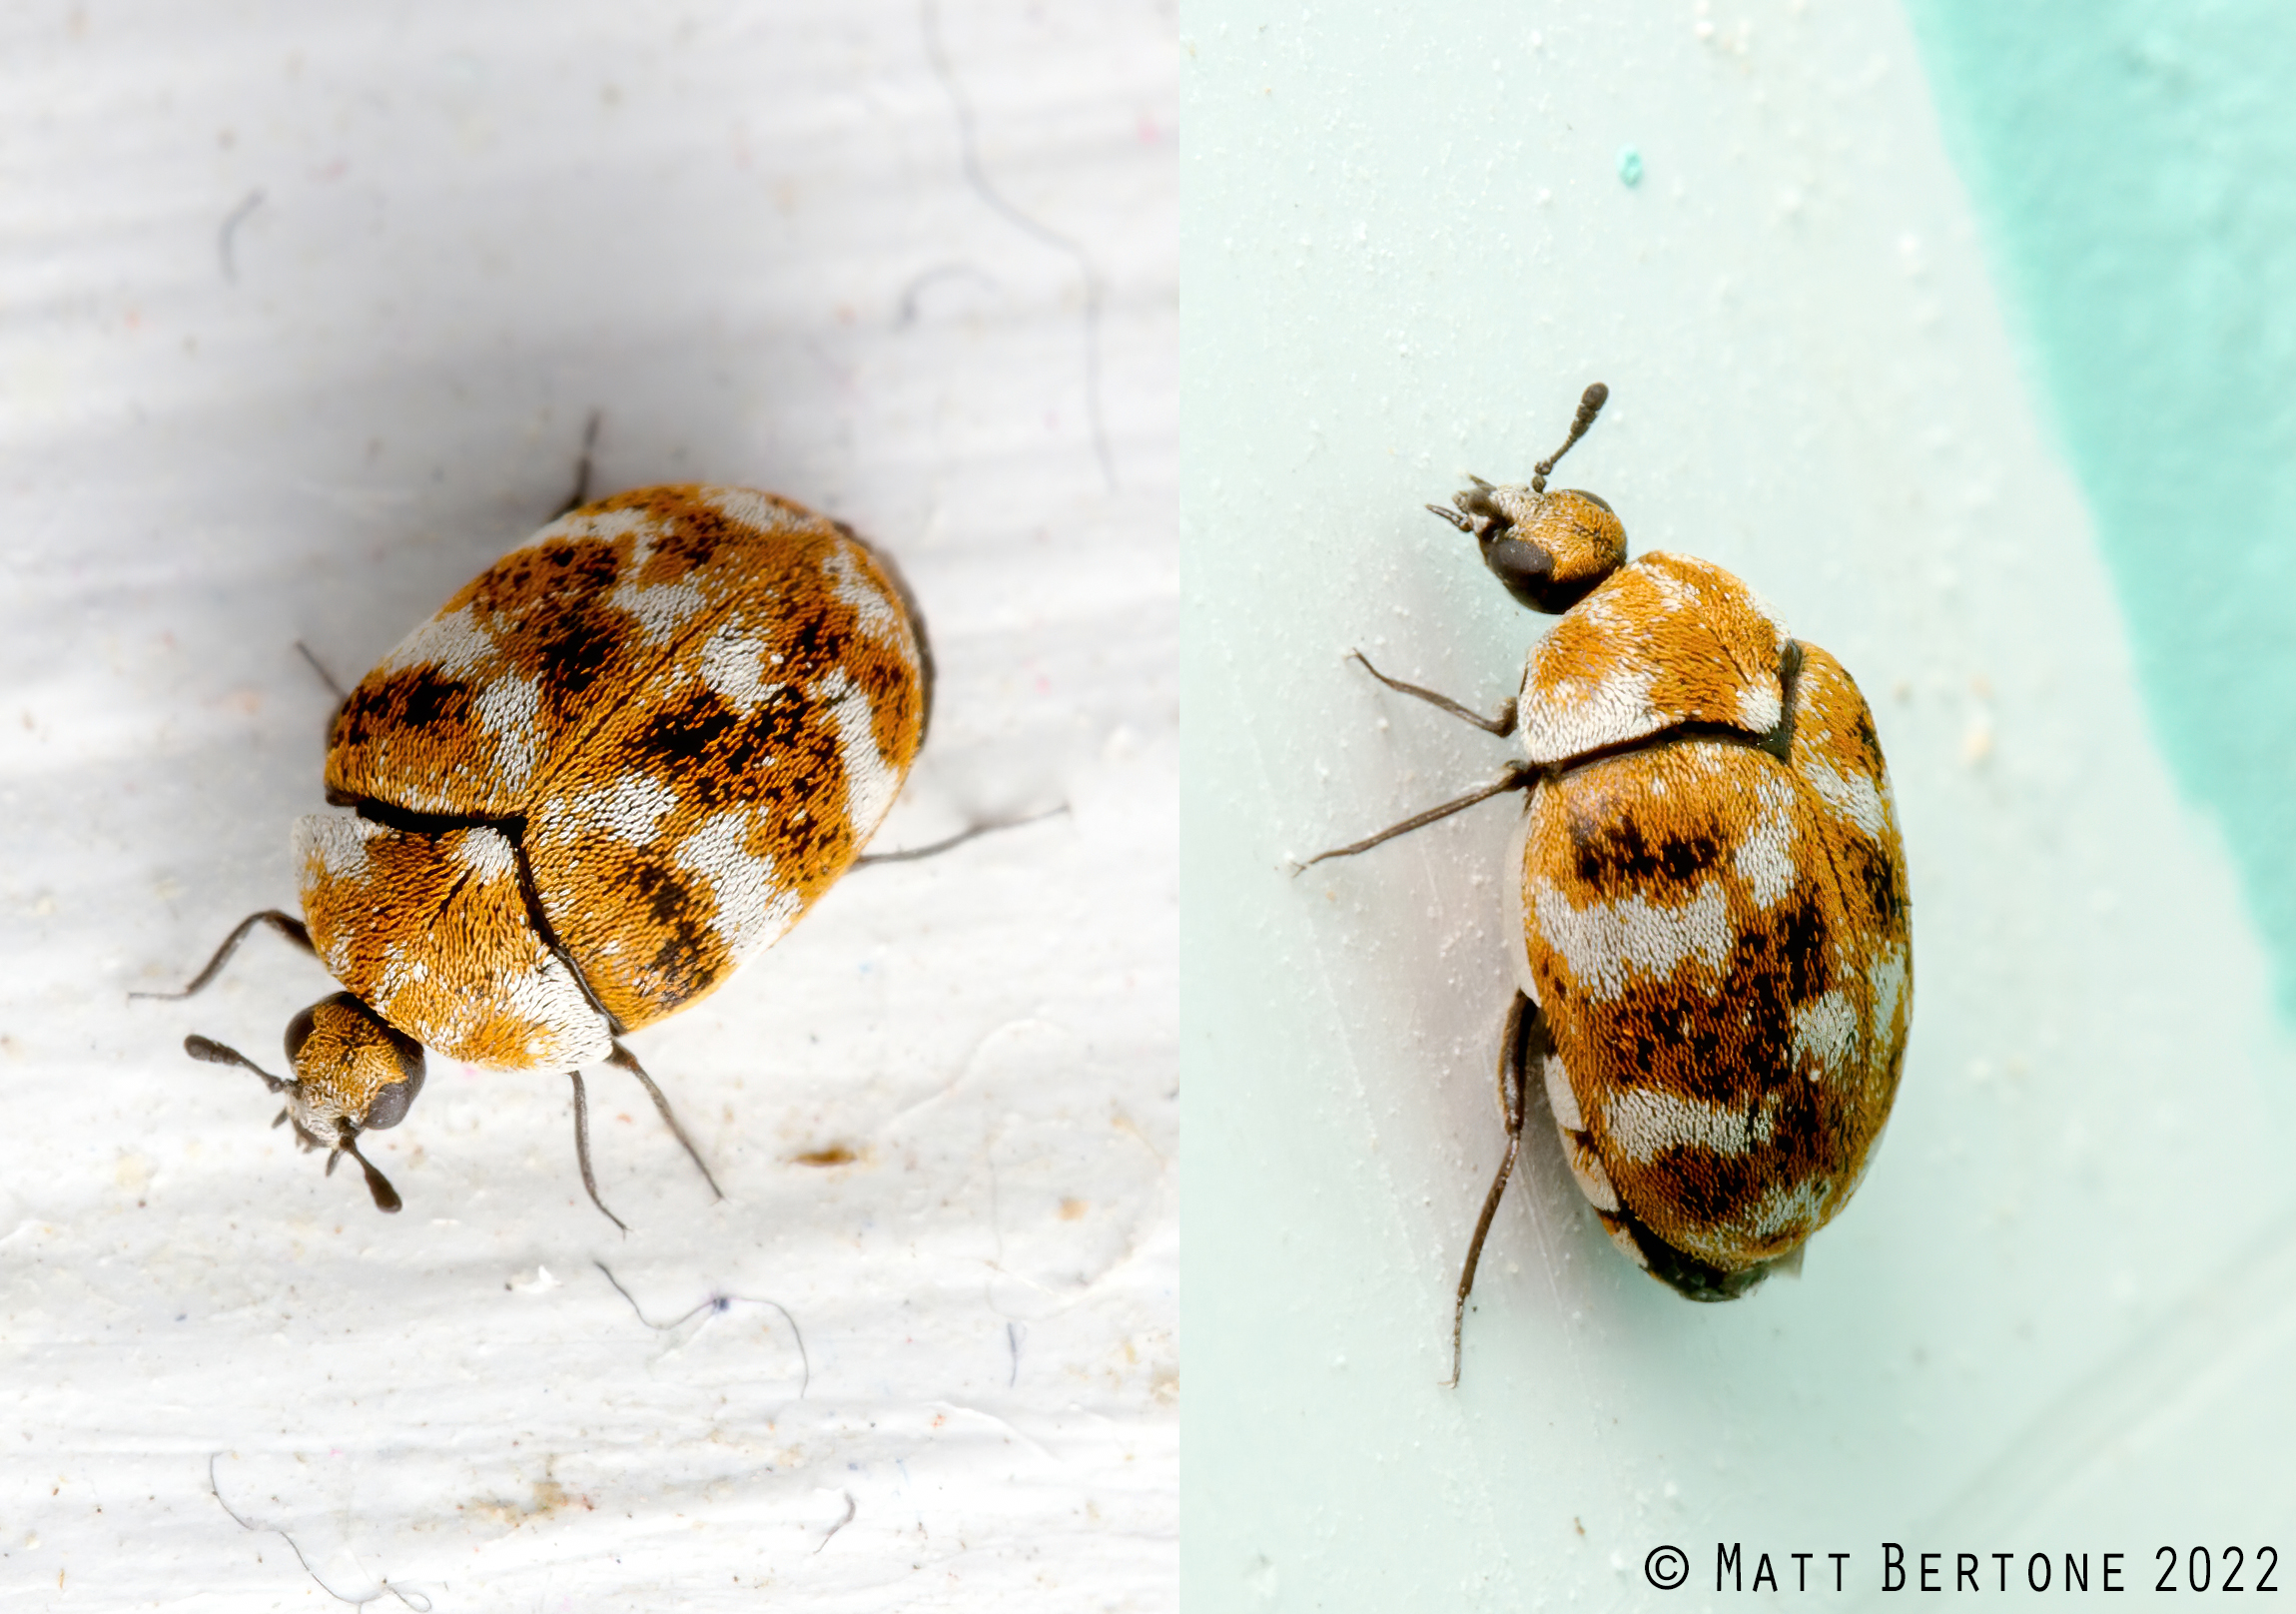 What You Should Know About Carpet Beetles